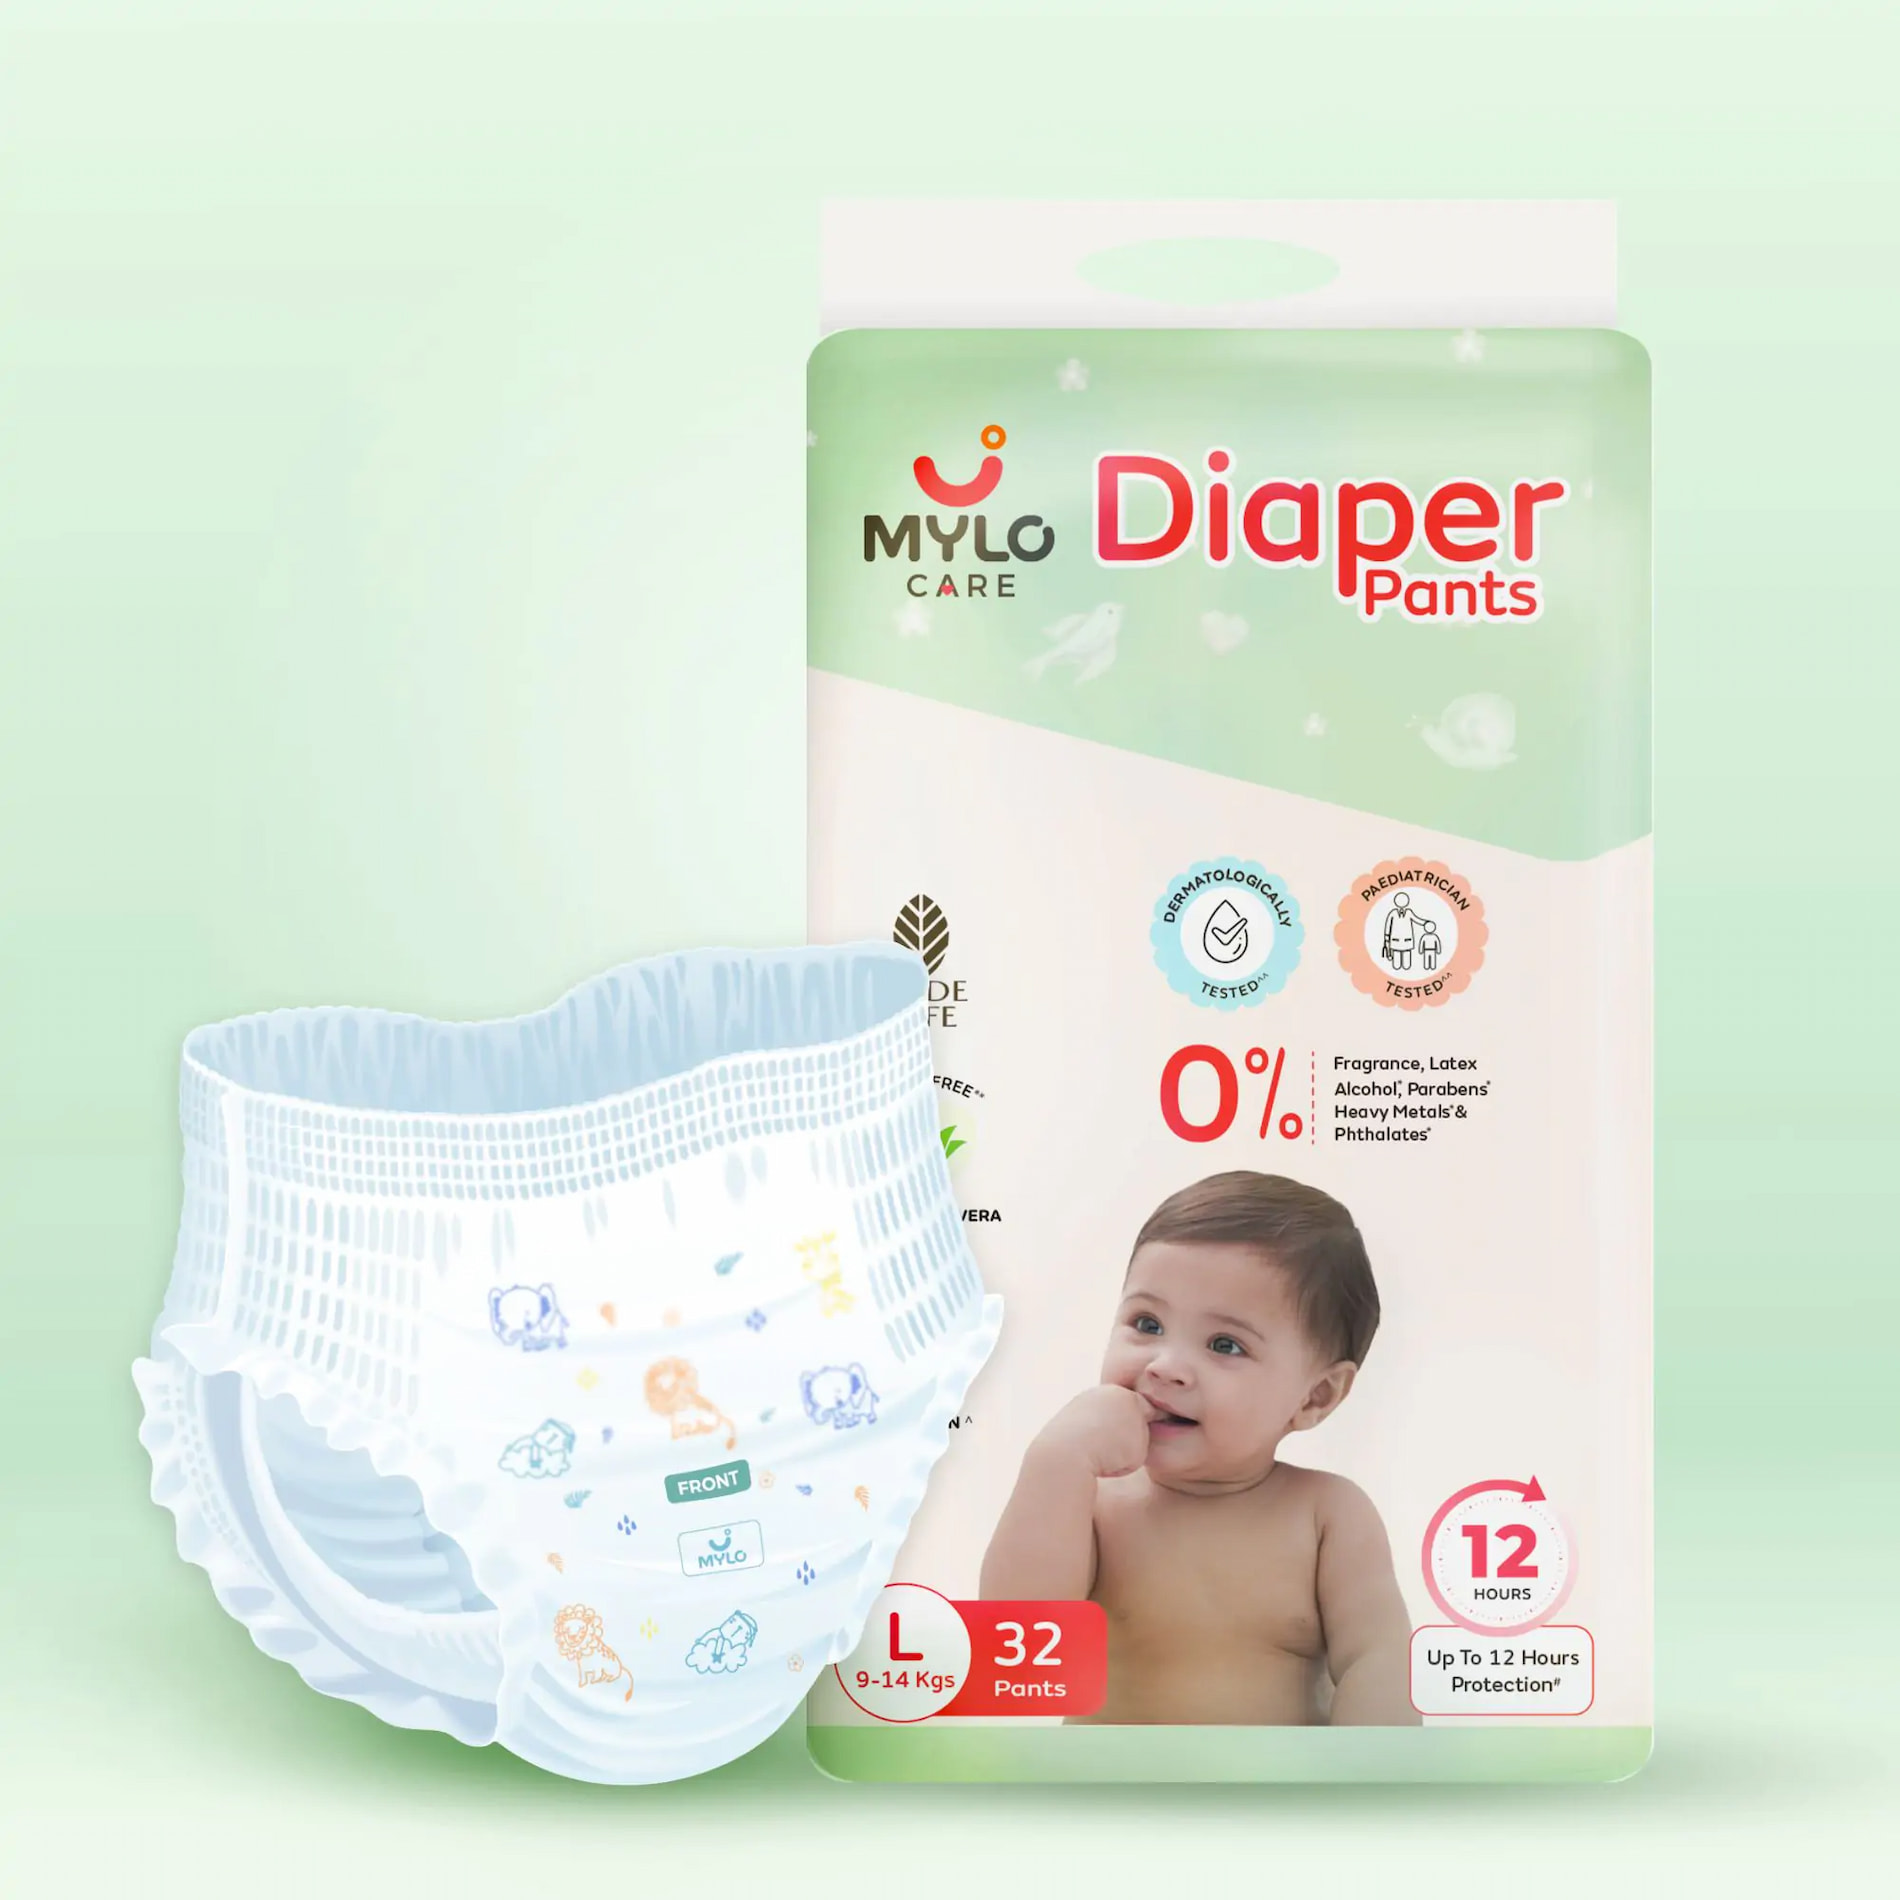 Mylo Care Baby Diaper Pants Large (L) Size, 9-14 kgs with ADL Technology - 32 Count - 12 Hours Protection